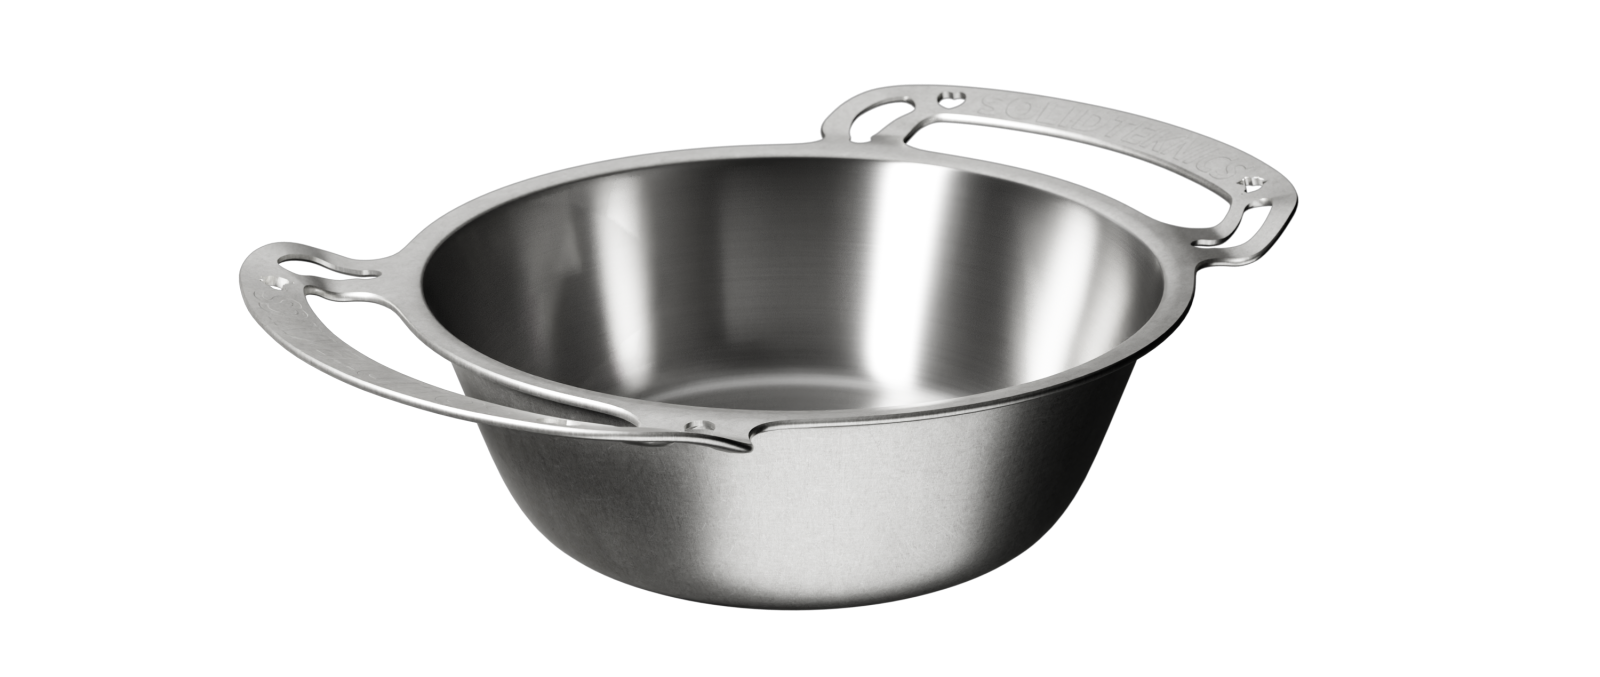 Solidteknics noni stainless steel 21cm deep pot, with dual handles.